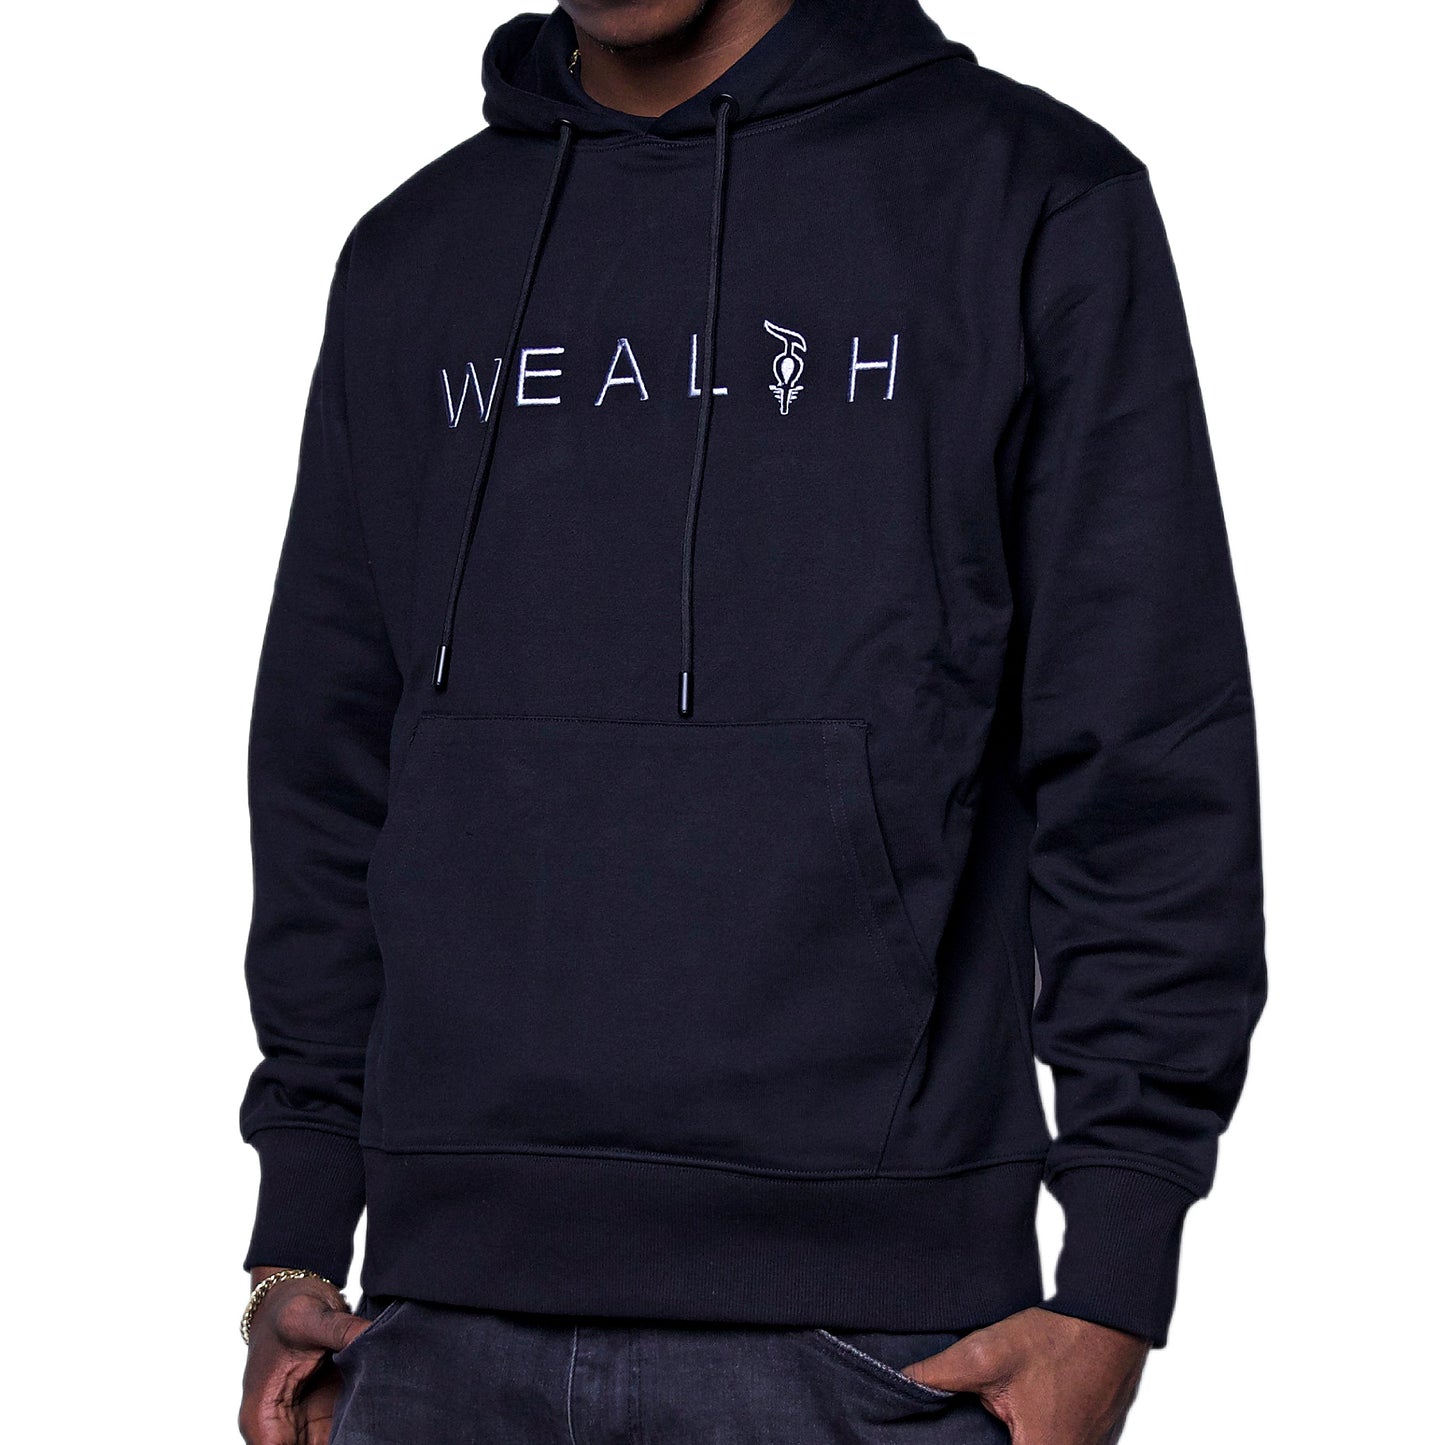 Wealth Staph of Ptah ™  3D Stitching Hoodie